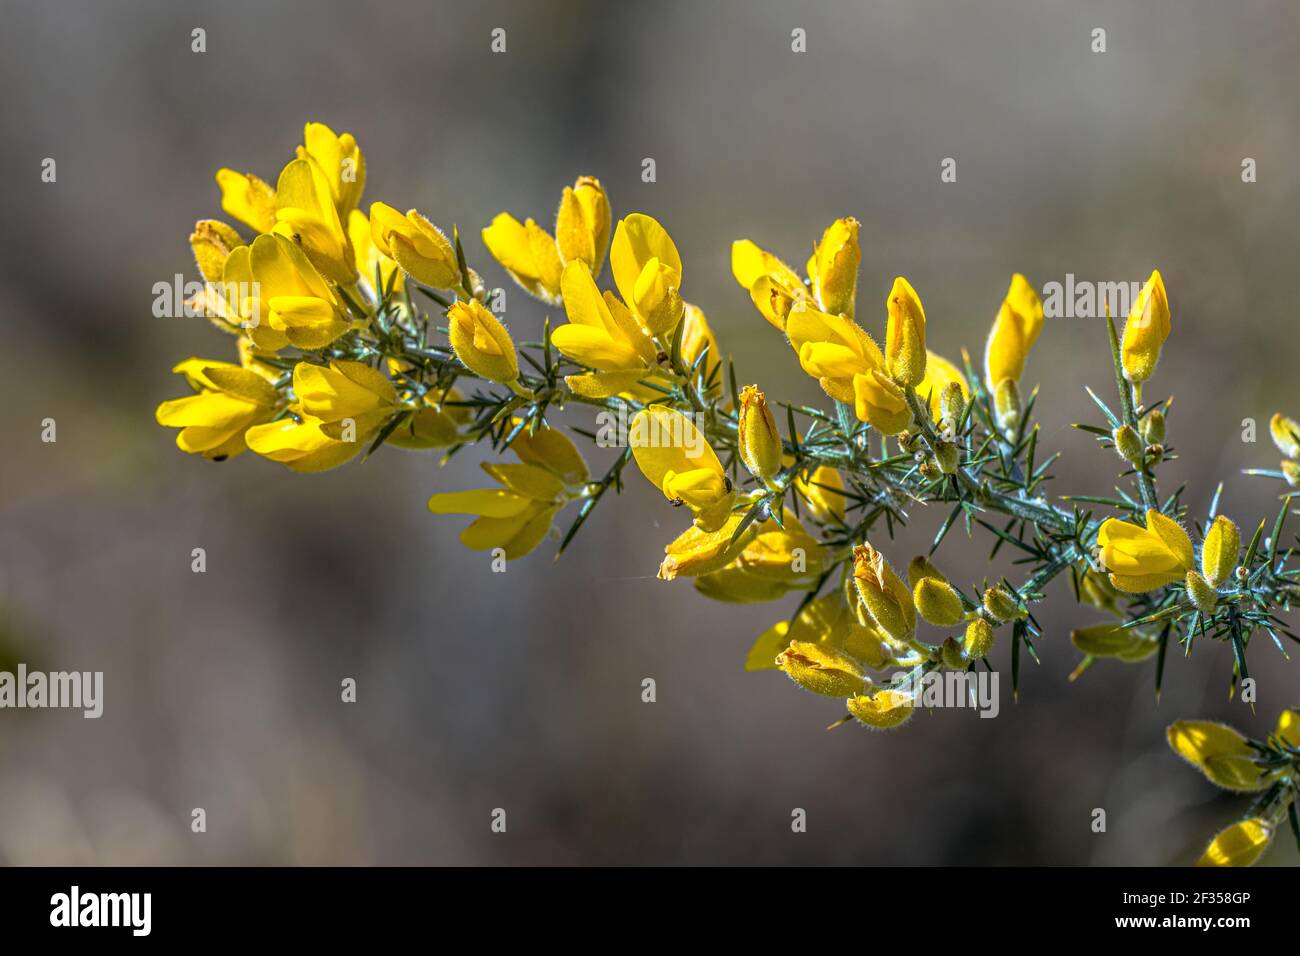 Common Gorse Ulex europaeus blooming with yelow flowers in ...